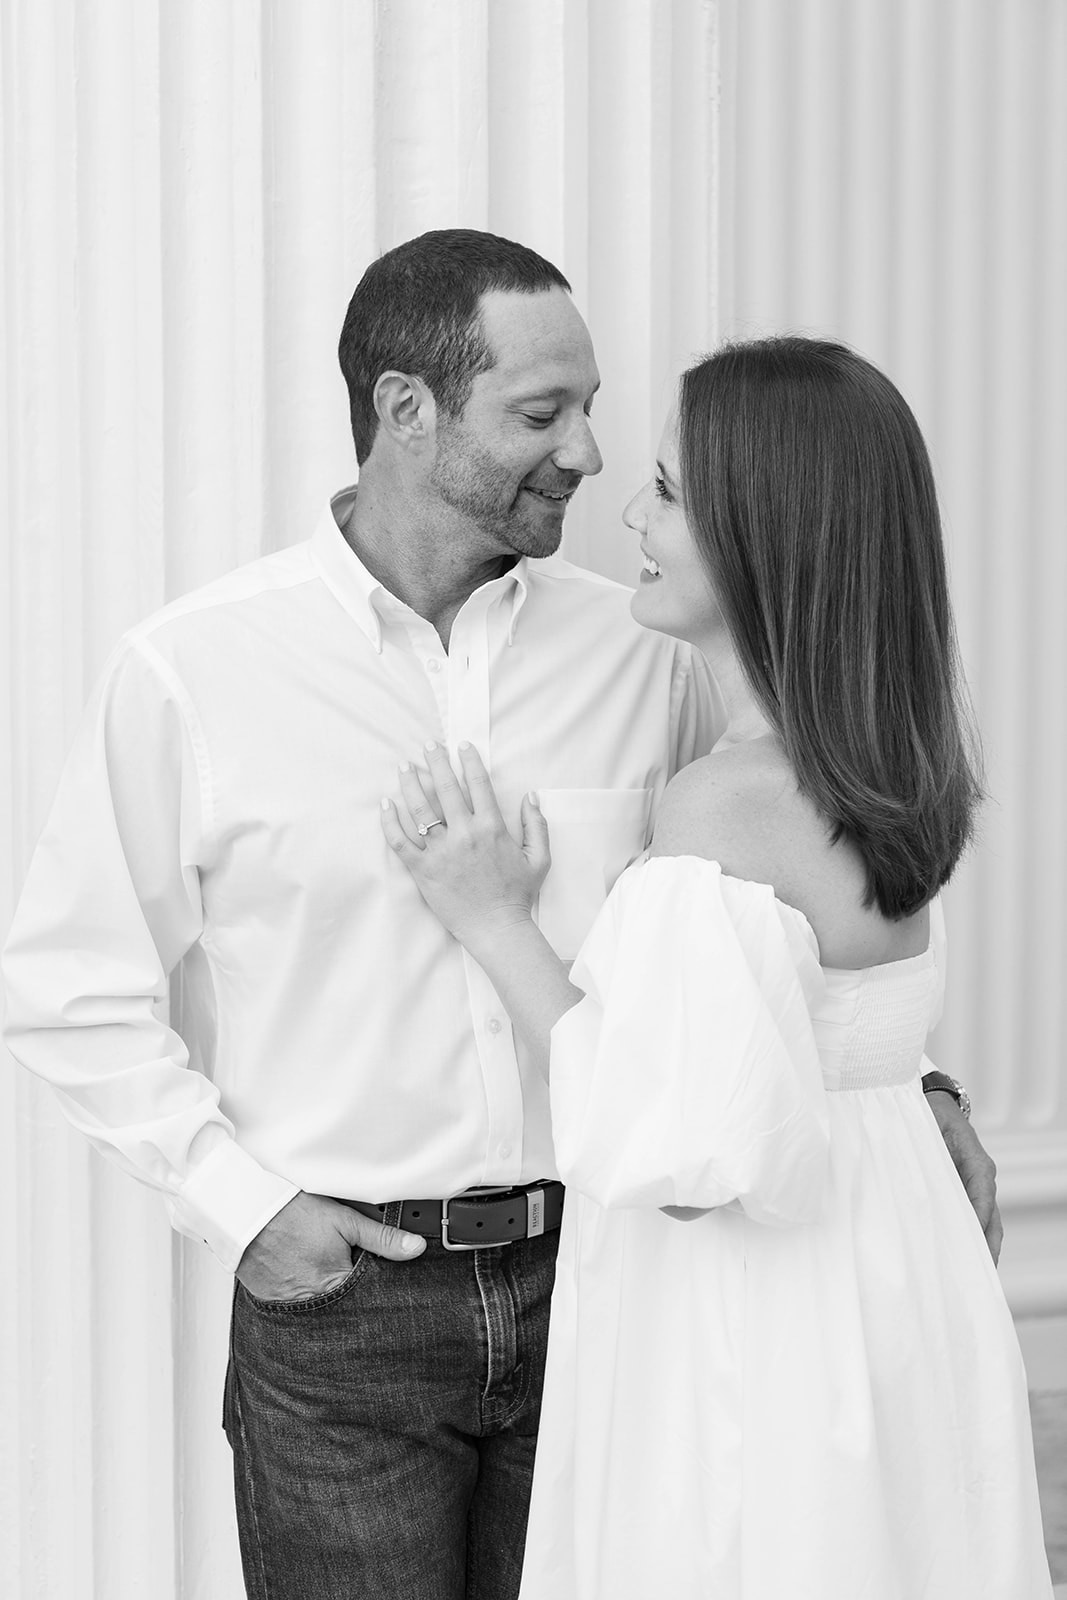 A black and white image of a beautiful couple snuggled up against a white column